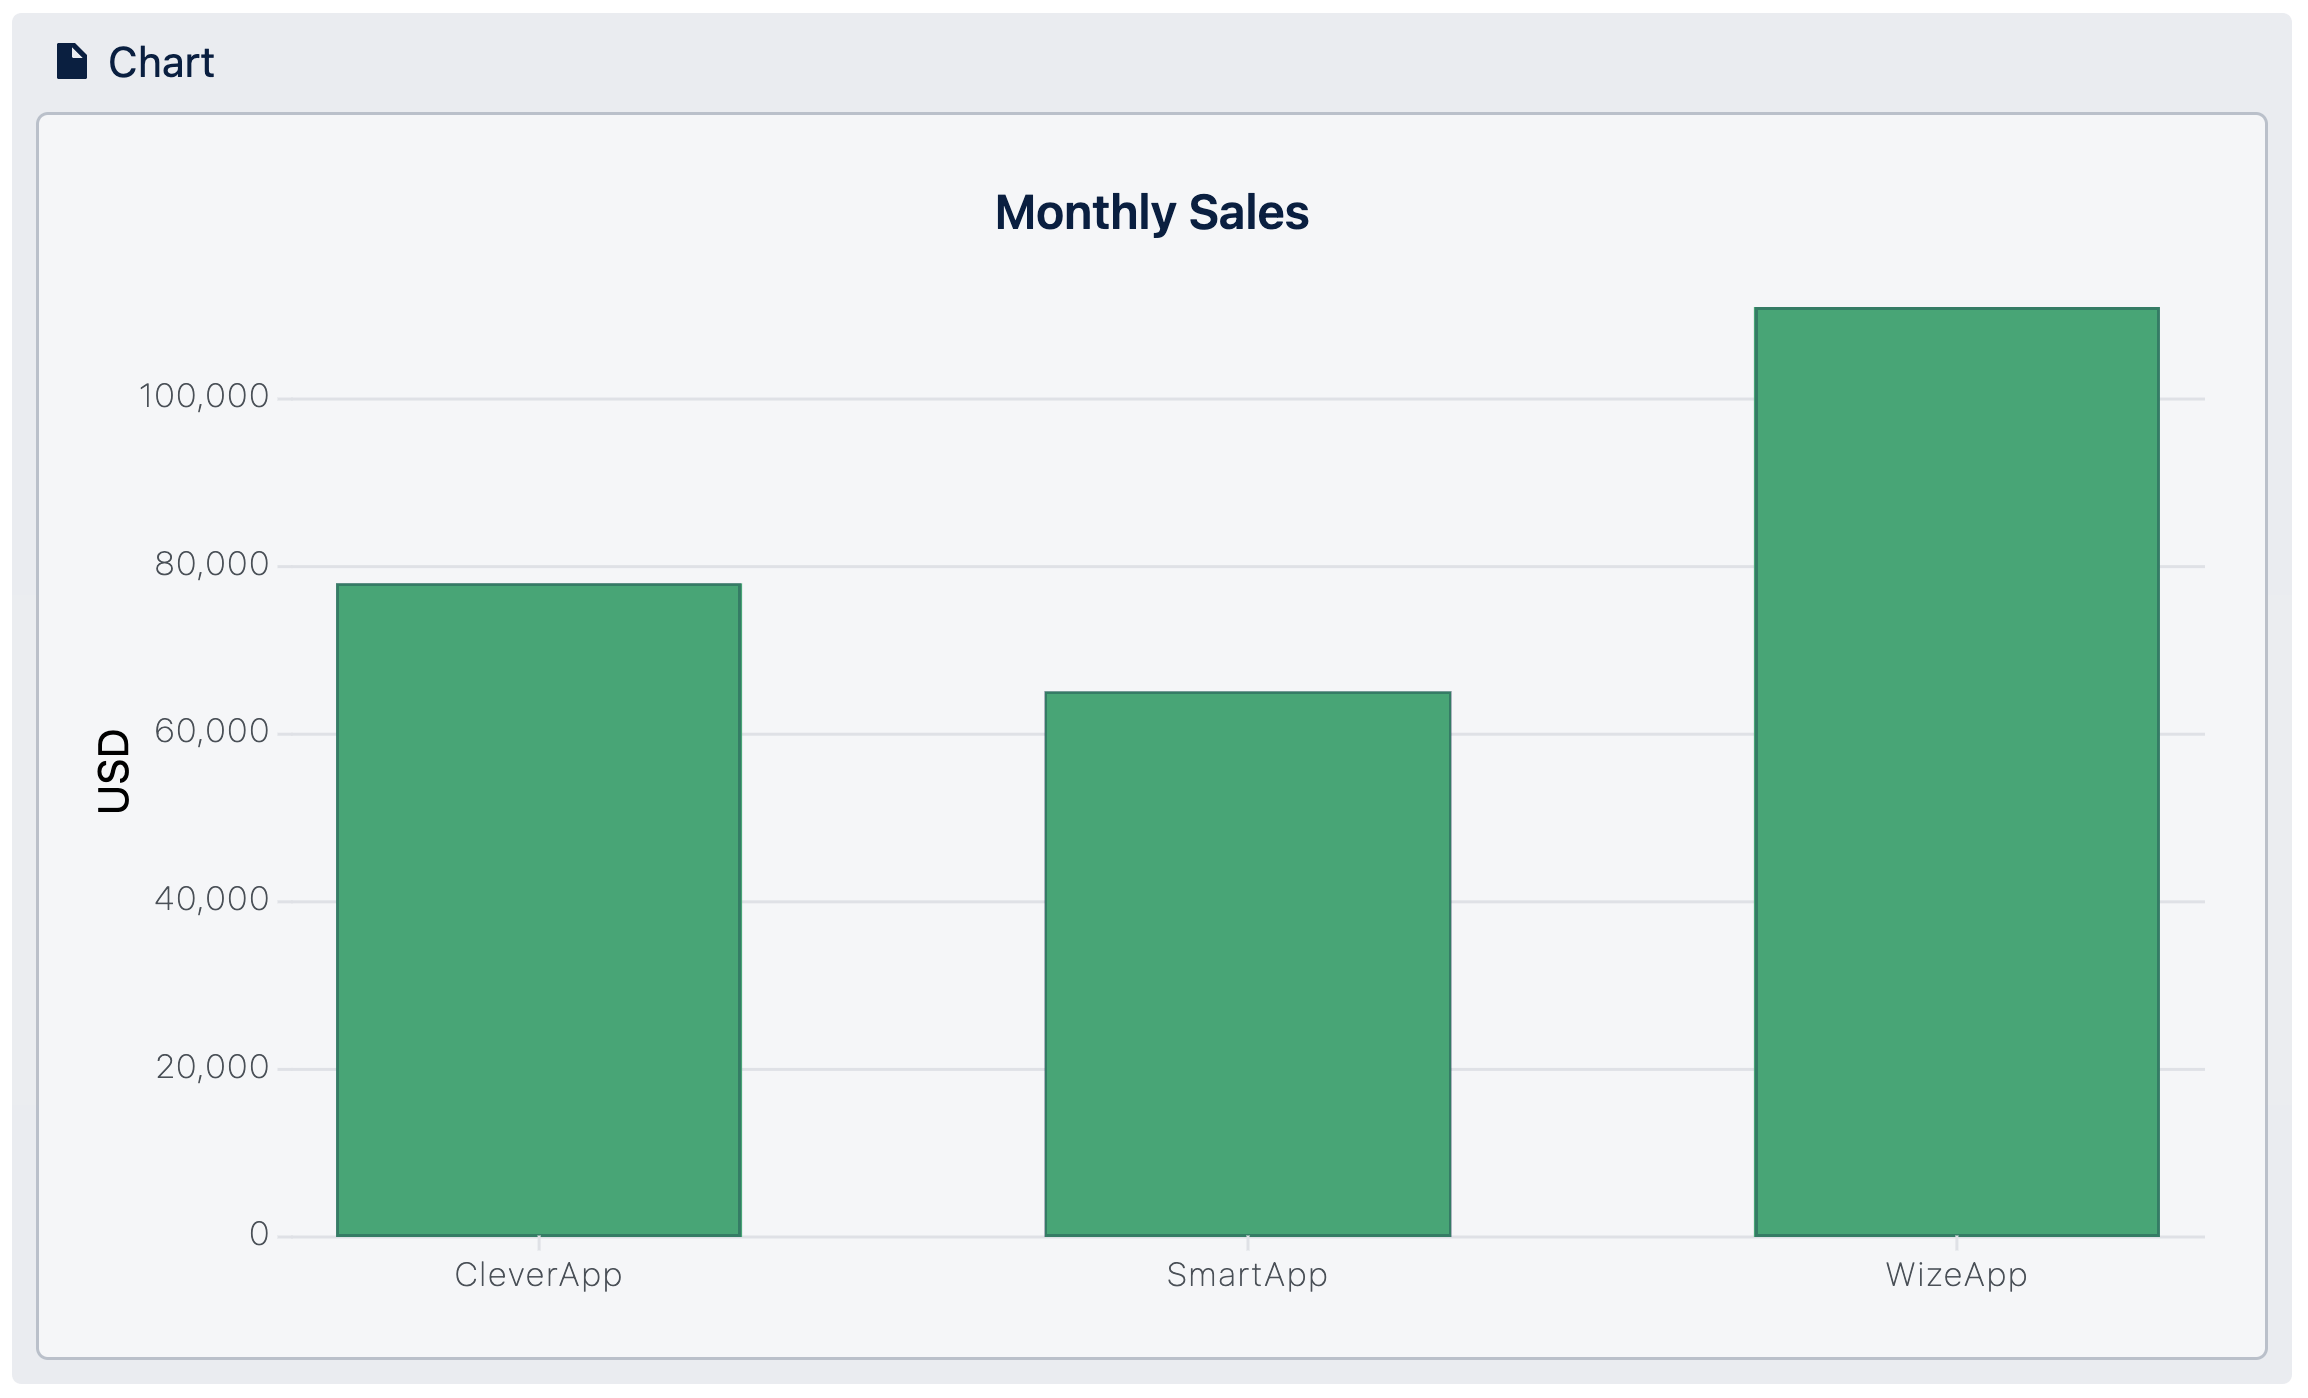 Bar chart showing monthly sales of different apps